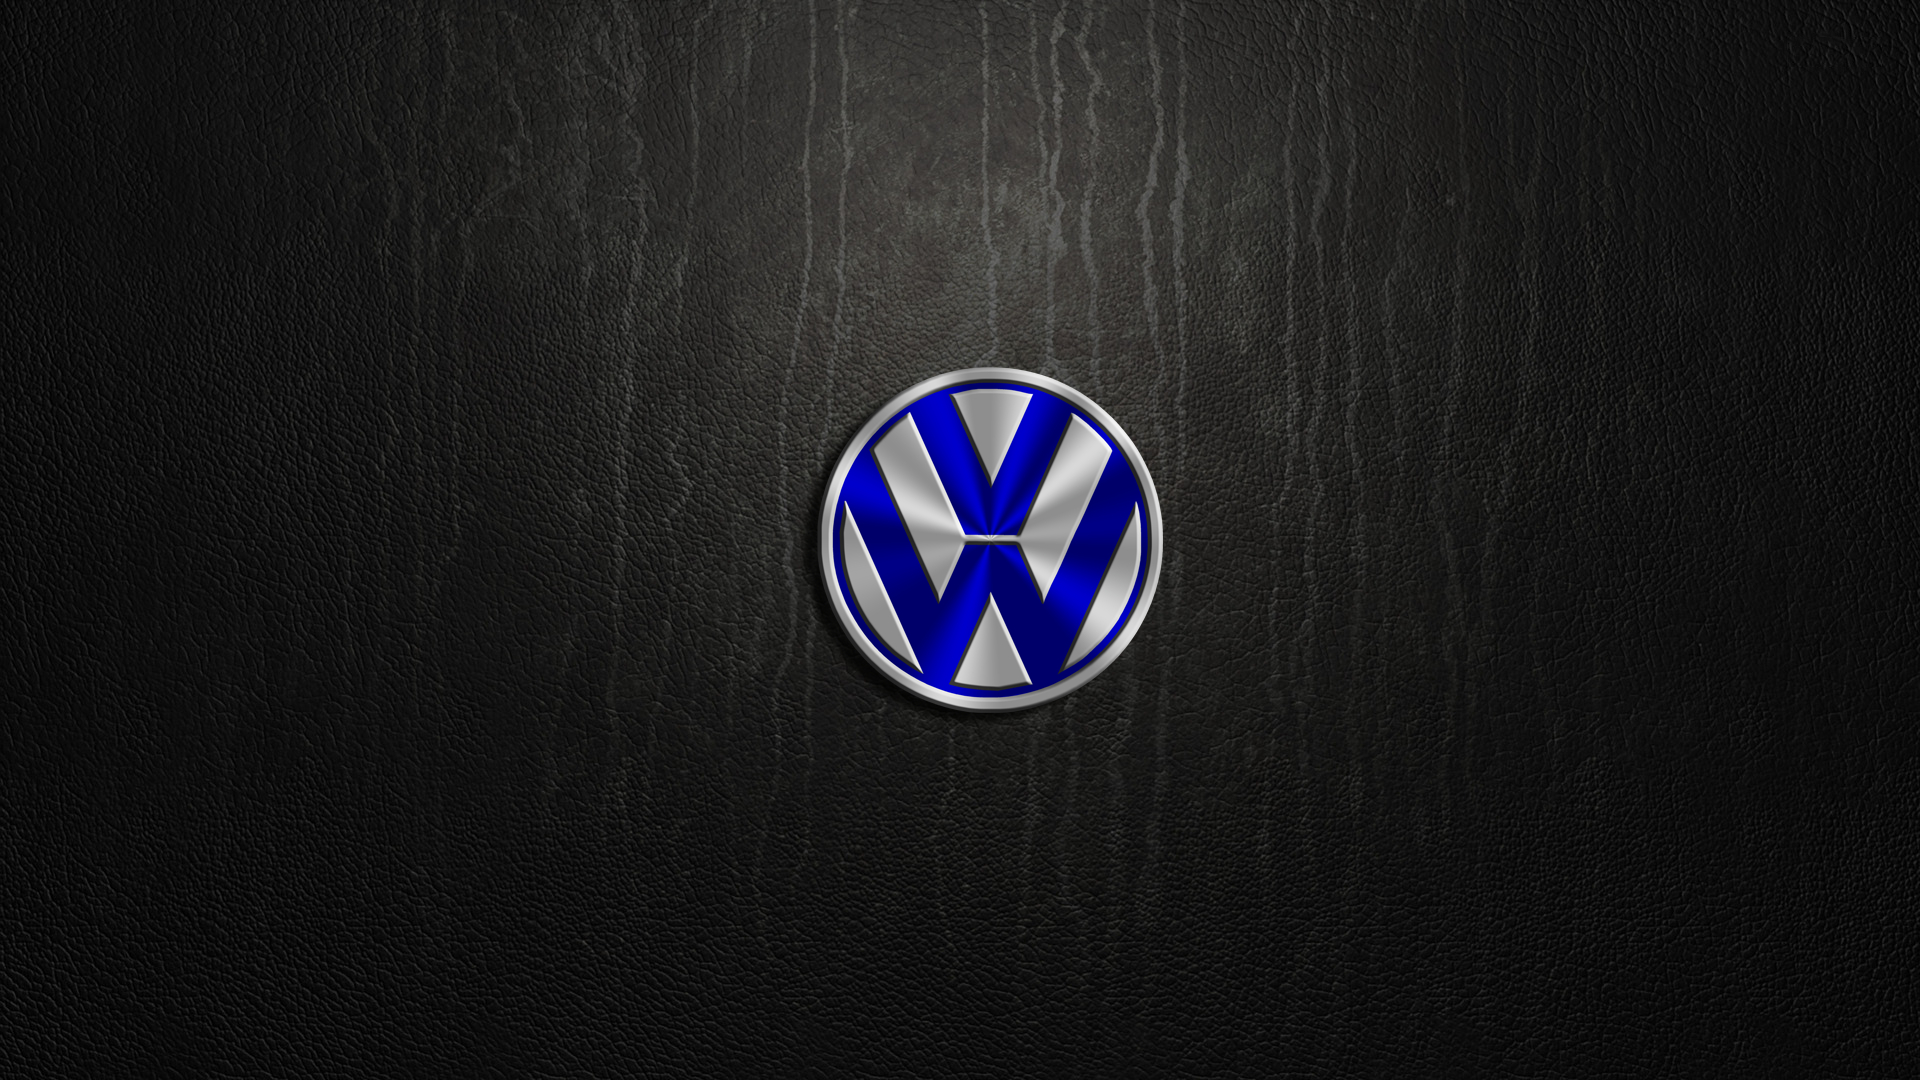 1920x1080 280+ Volkswagen HD Wallpapers and Backgrounds